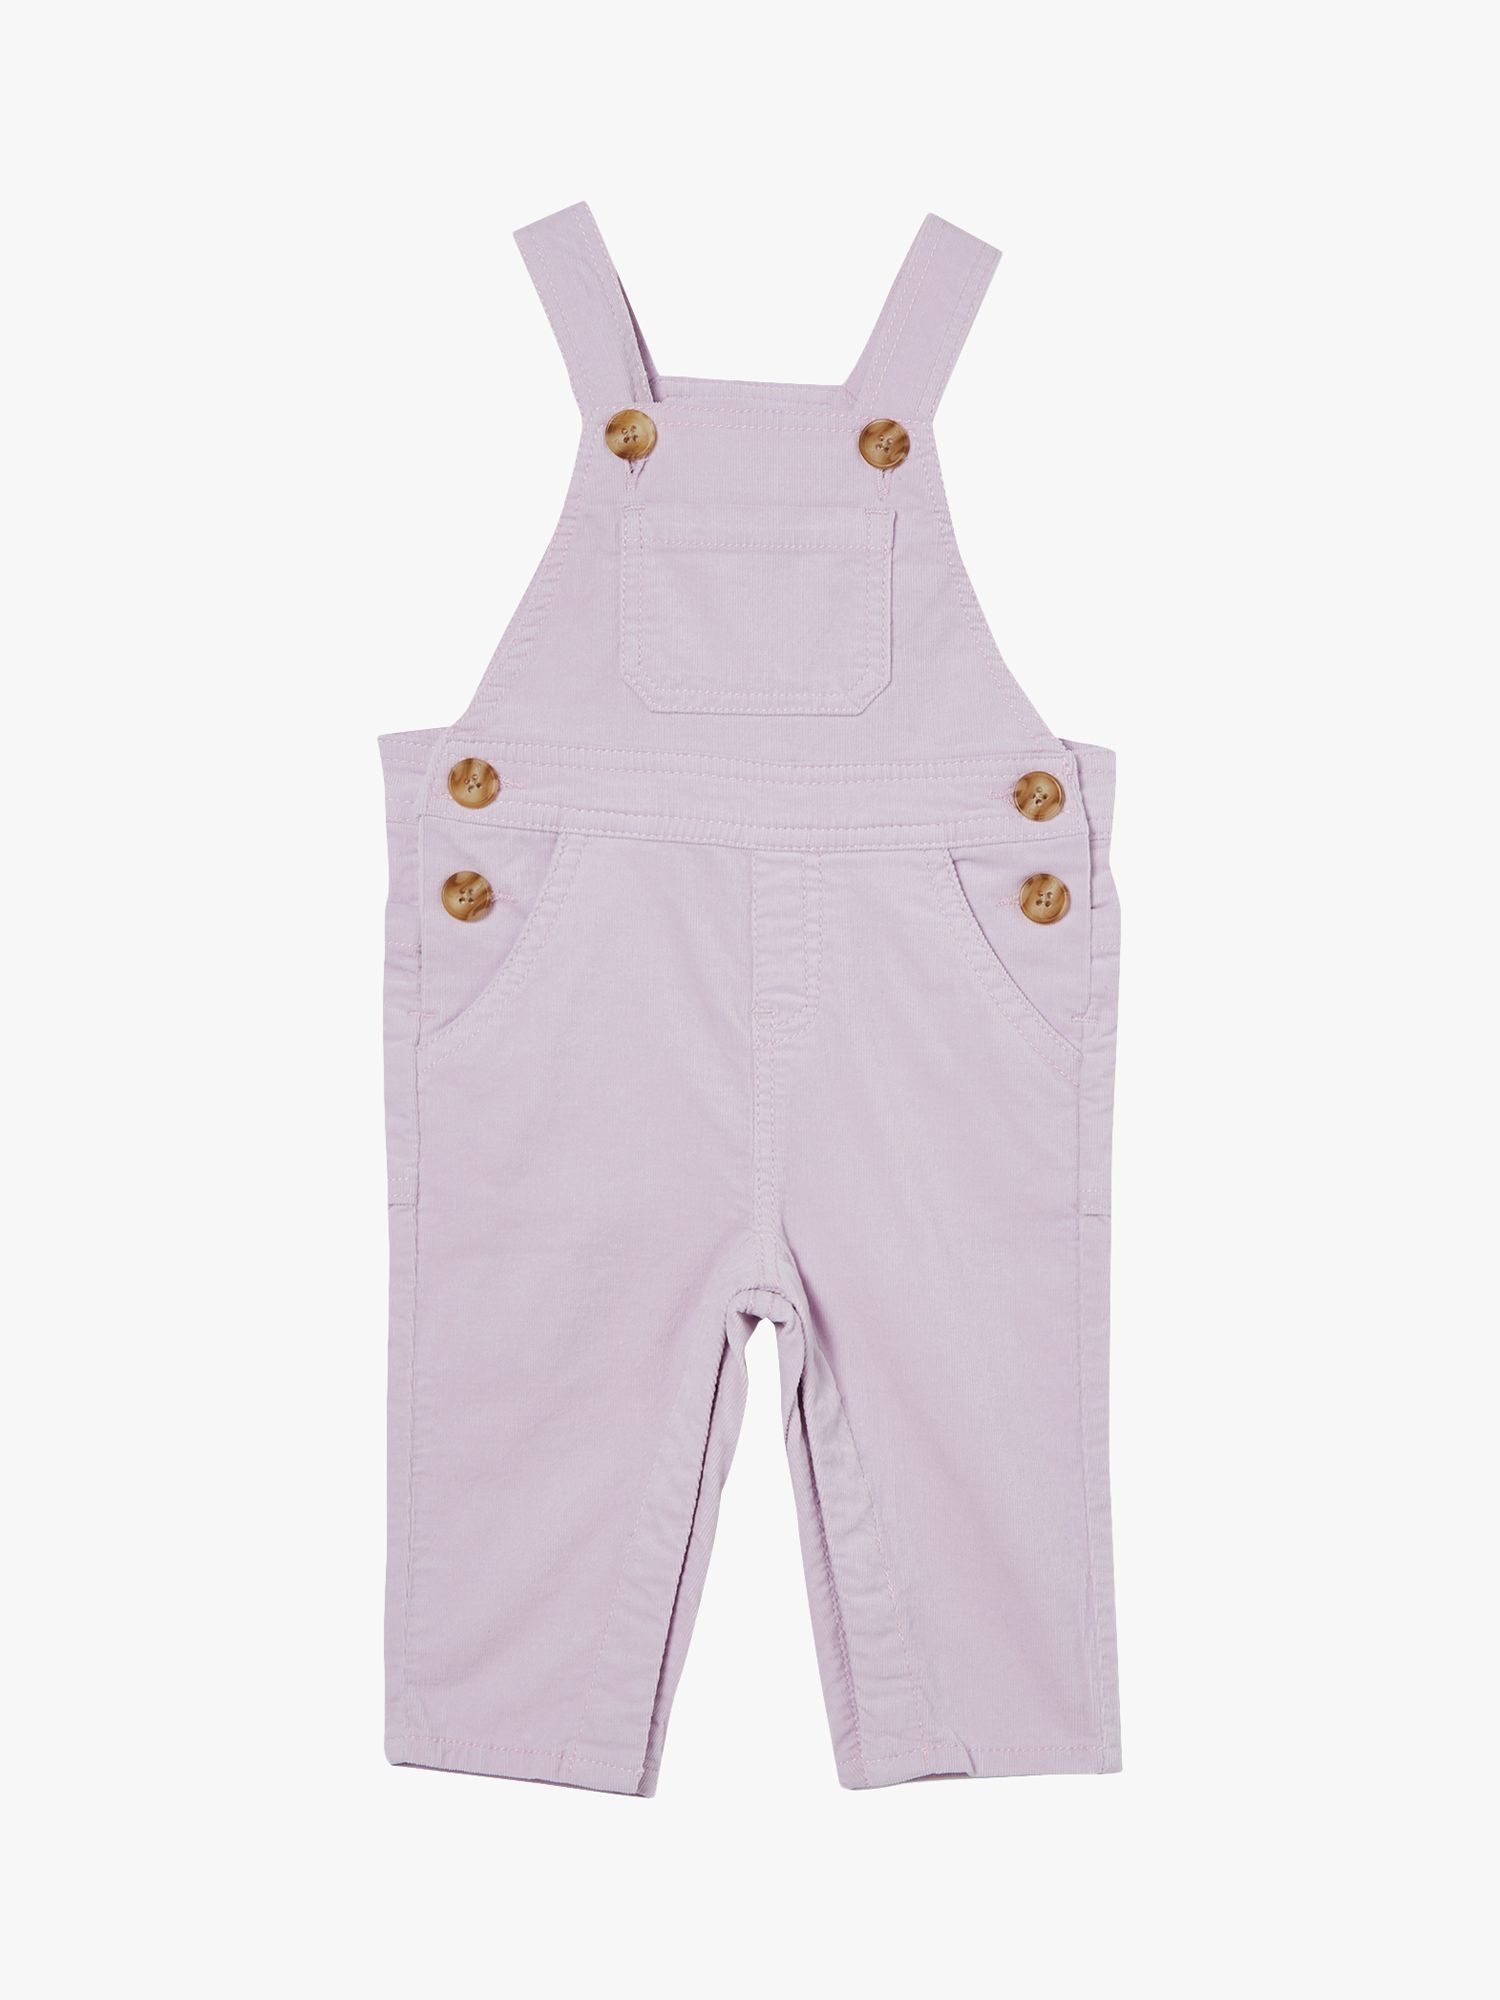 Cotton On Baby Ray Cord Dungarees Lavender Fog 18-24 months unisex 98% cotton, 2% elastane